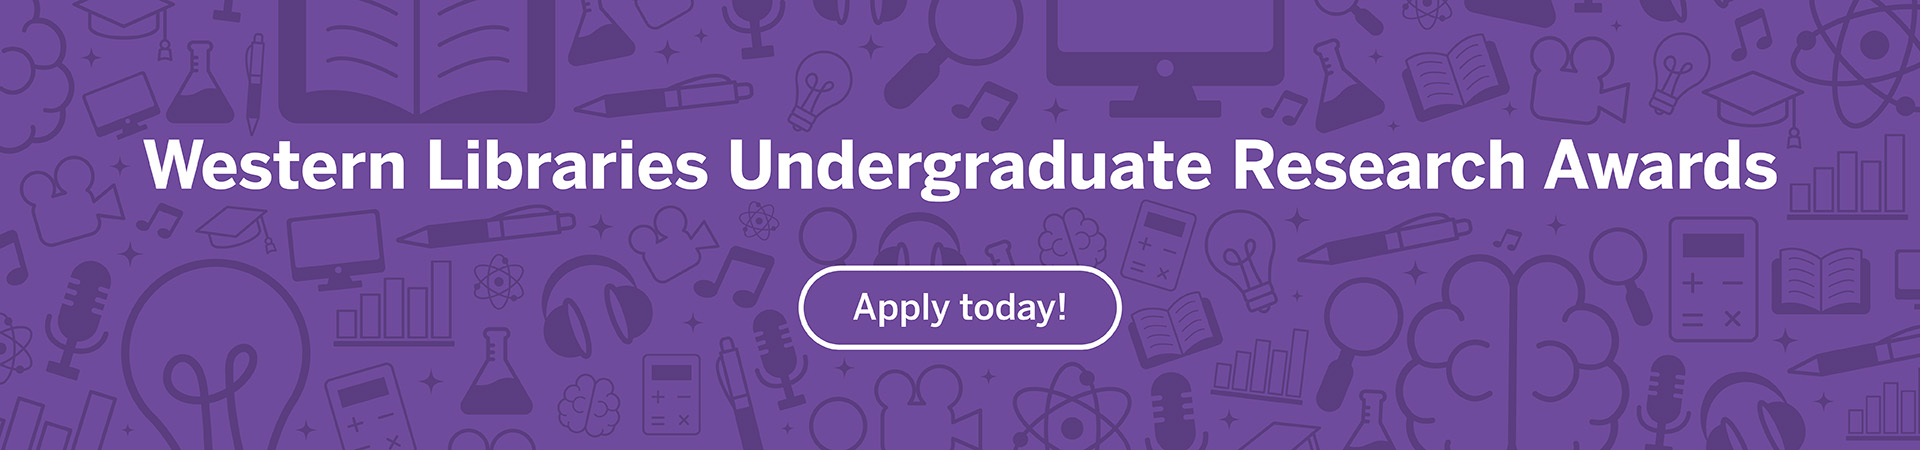 Apply for the Western Libraries Undergraduate Research Awards